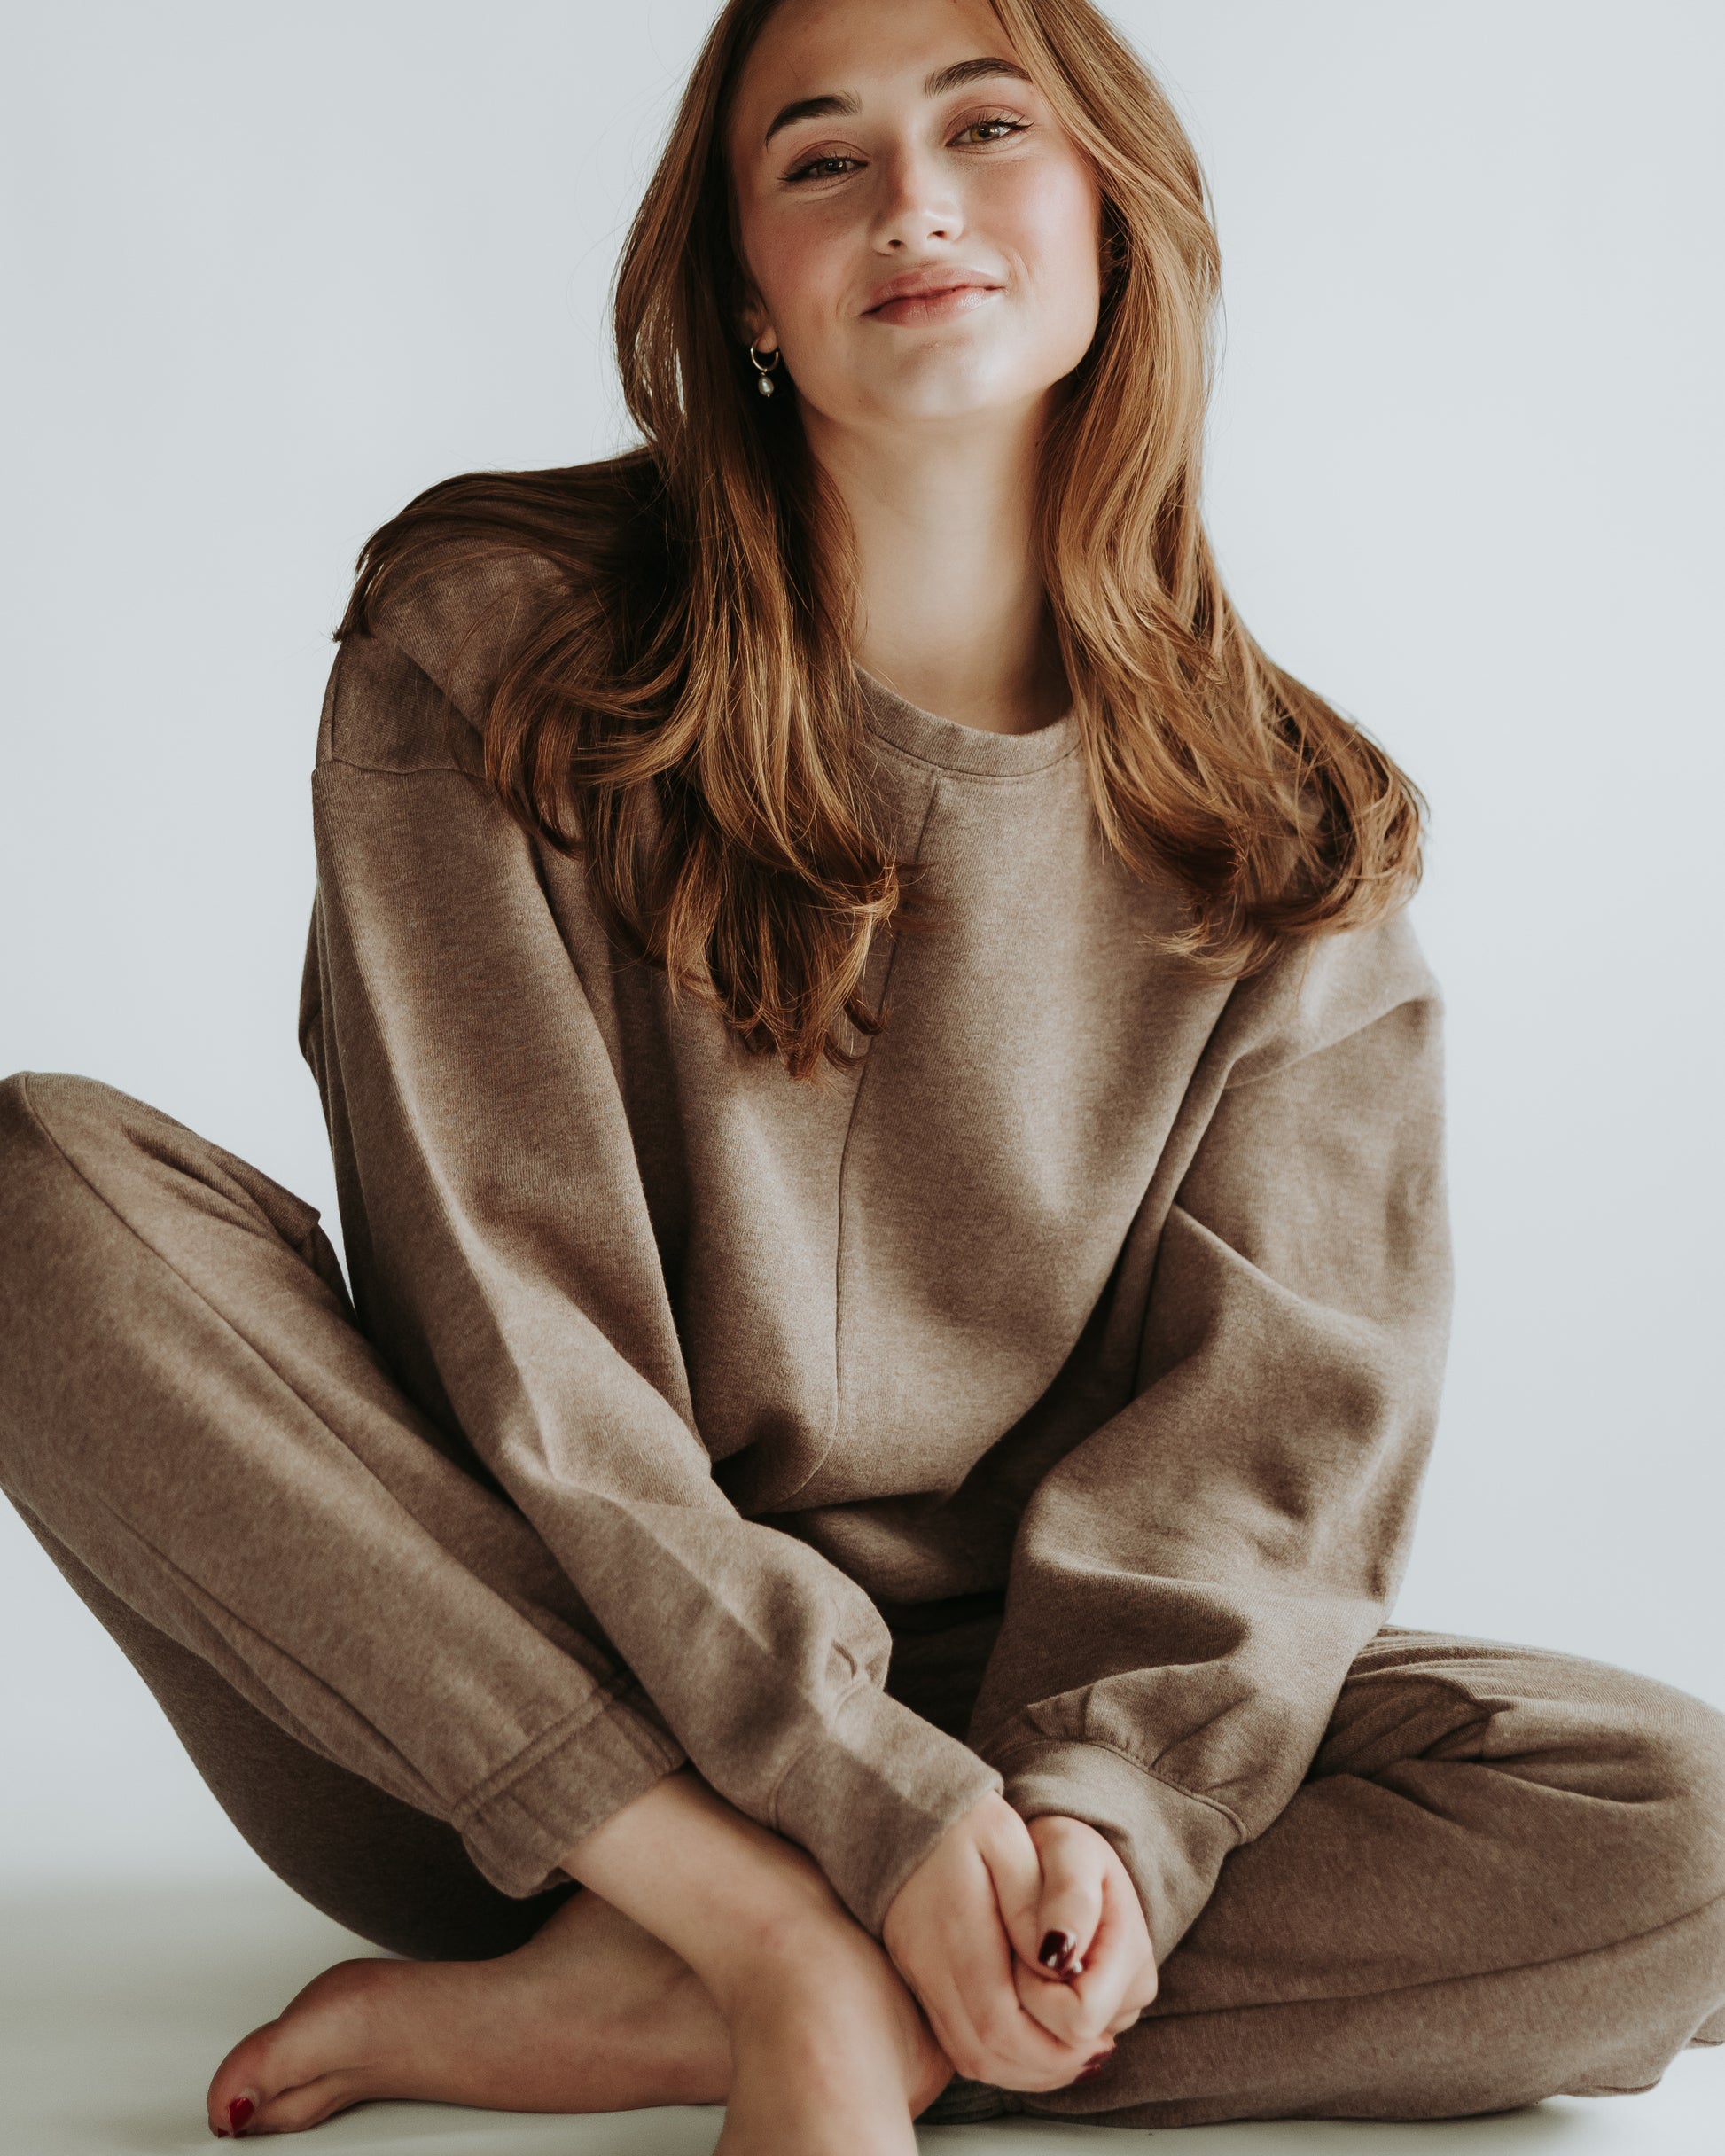 A woman is sitting on the ground and wearing the two-pieces fleece set in brown